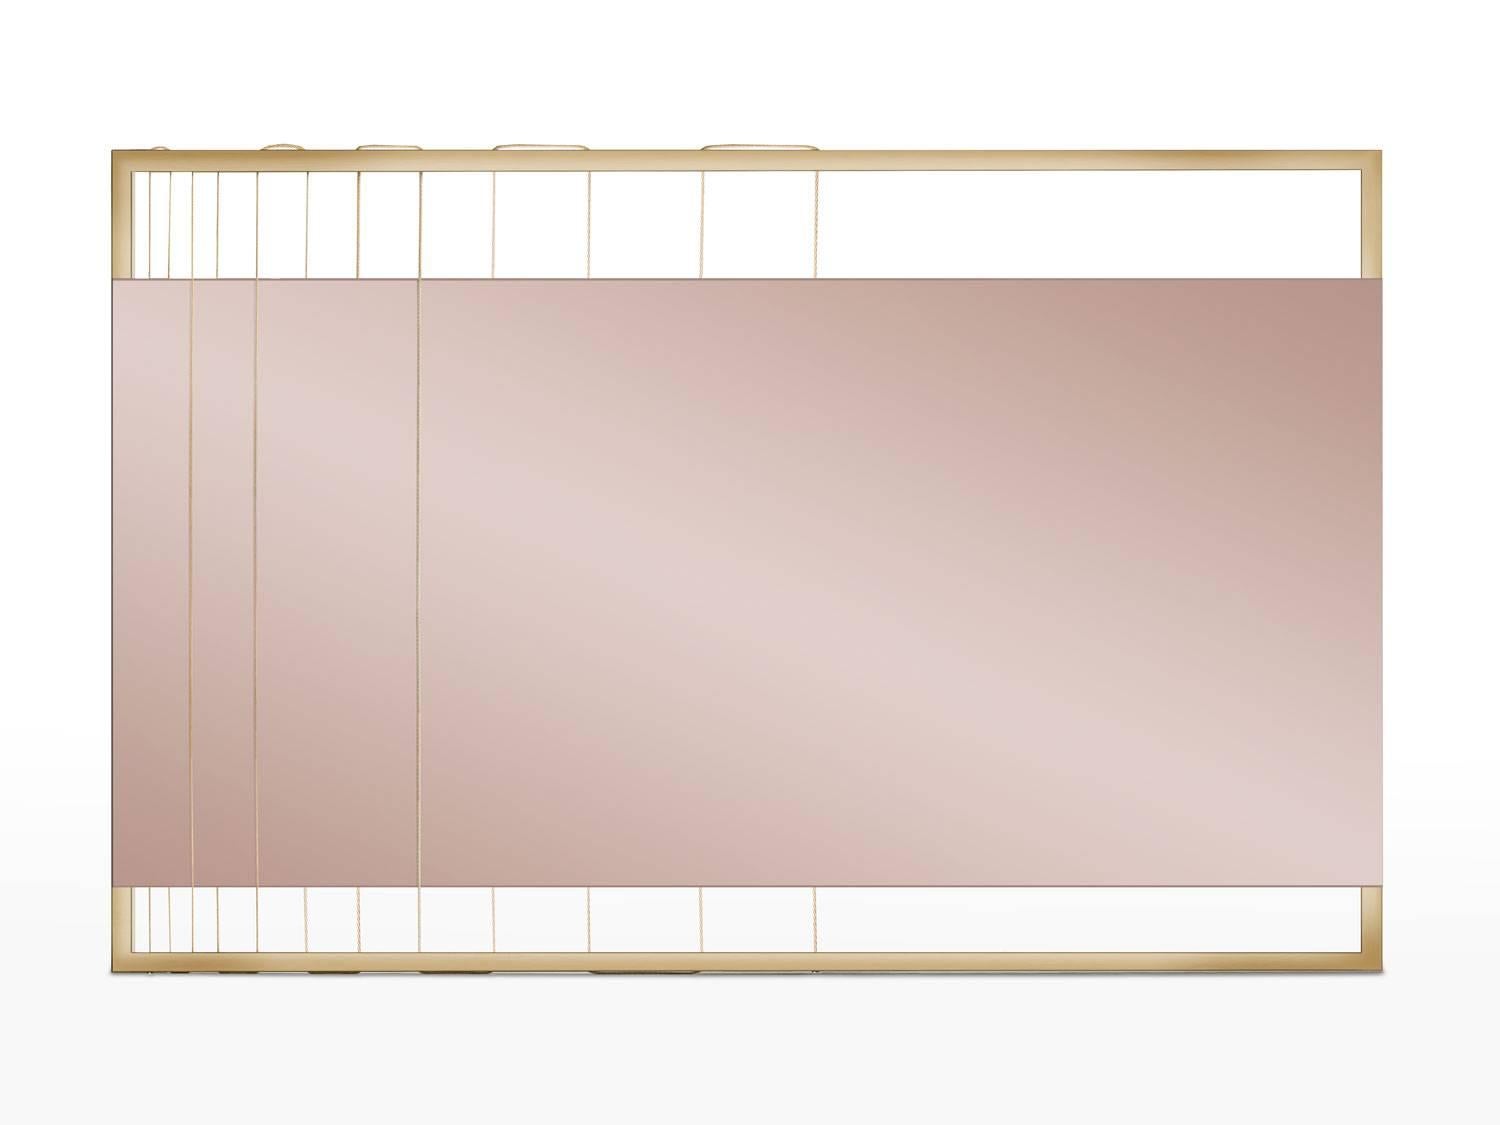 AEGIS-M mirror is made to order using gold finish stainless steel frame, tinted mirror and gold steel wire. The mirror can be hung vertically or horizontally. A modern contemporary design using only the finest materials and manufacturing methods.